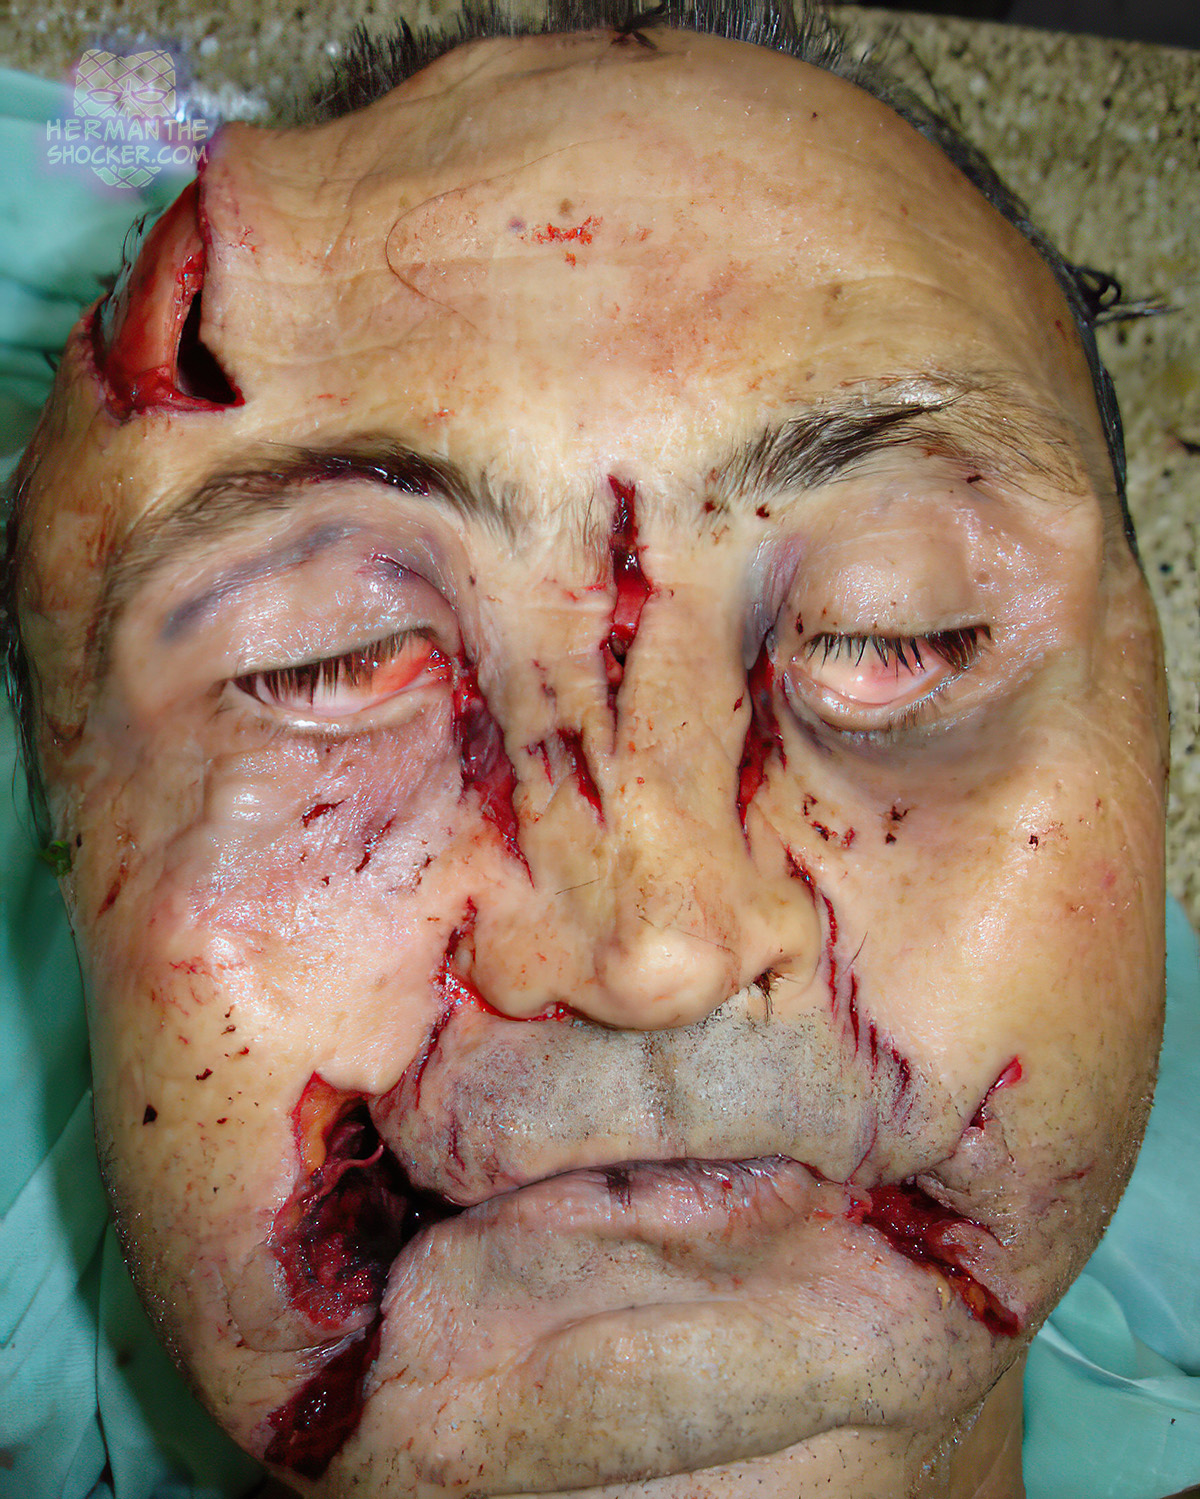 Linear tears on face from the rapid expansion of departed gases from an intraoral gunshot